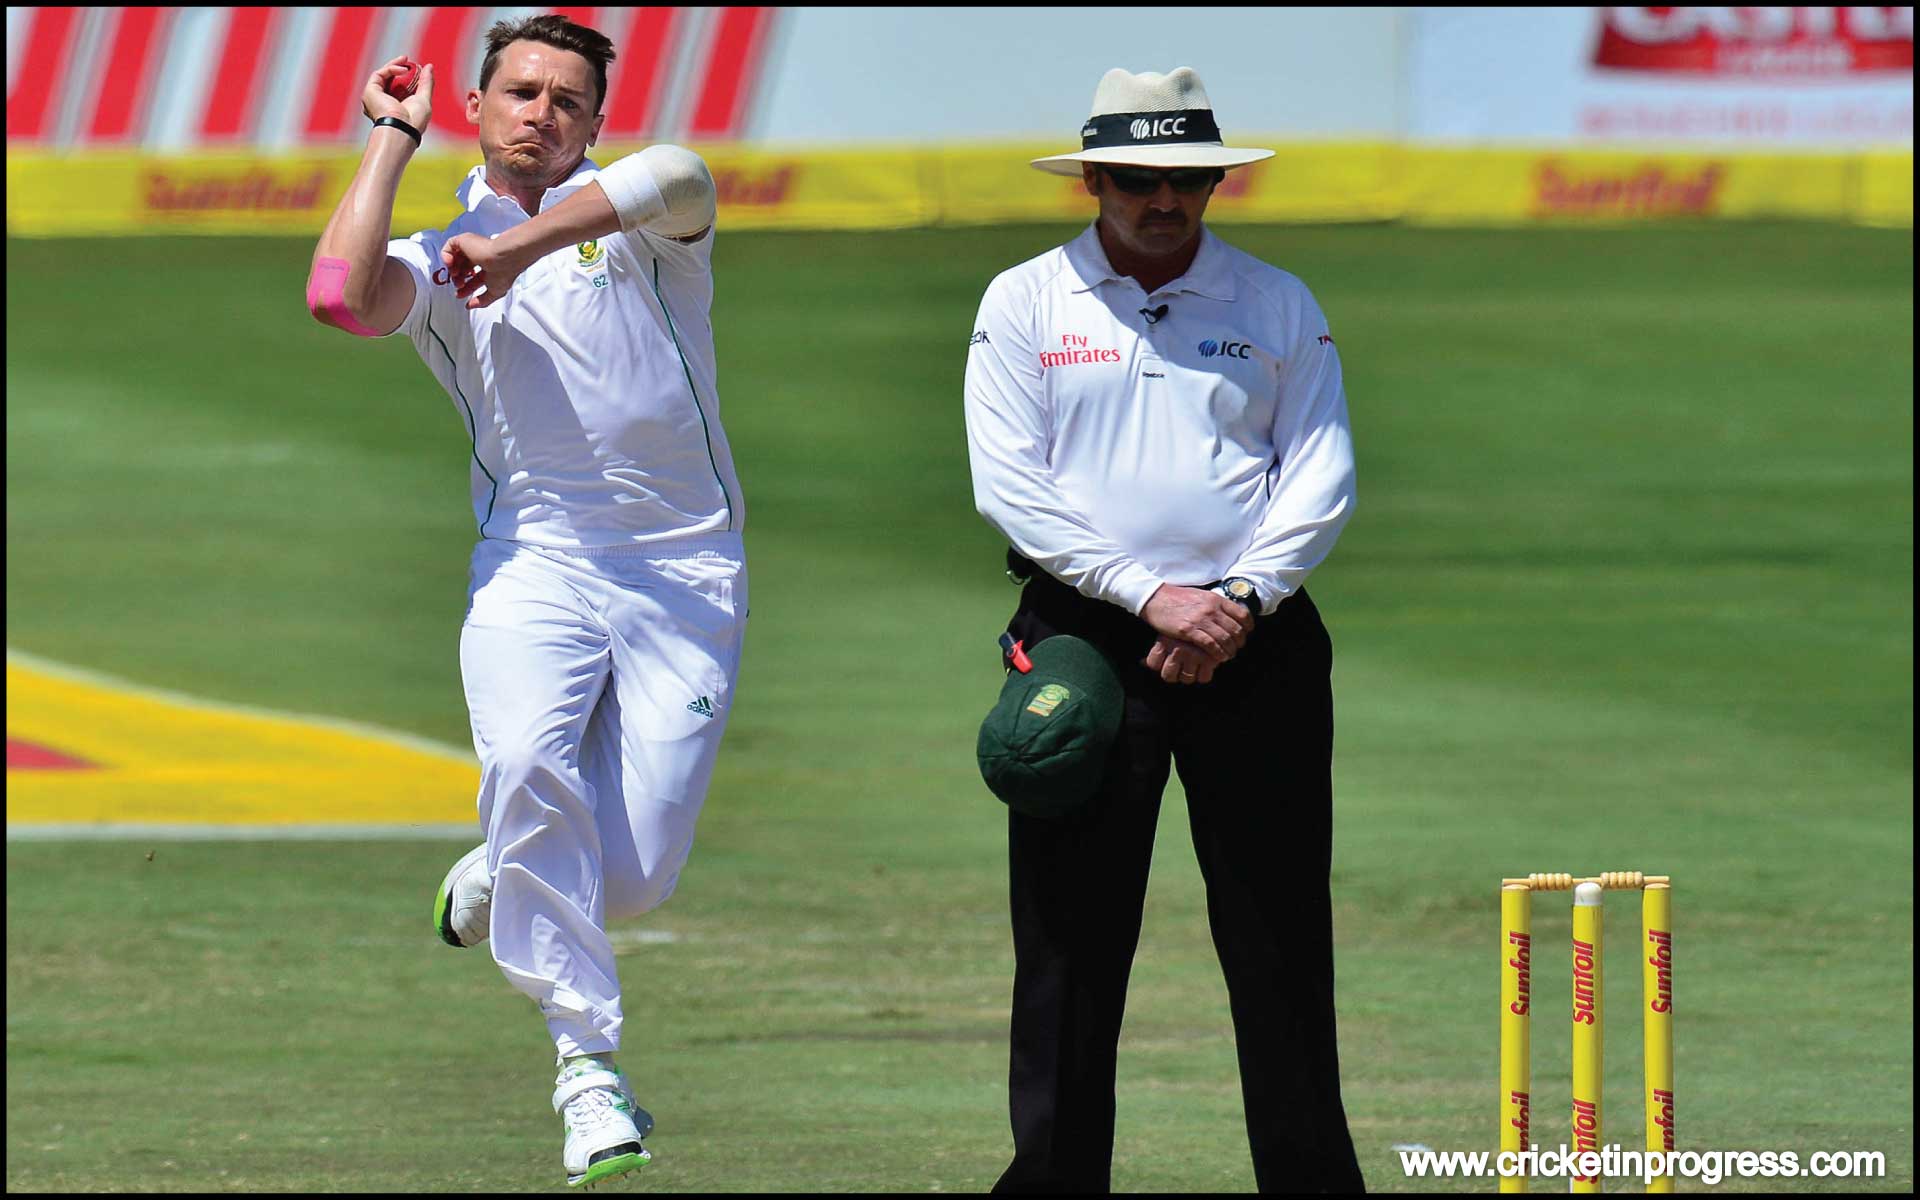 The fall and decline of Dale Steyn. Or, is it